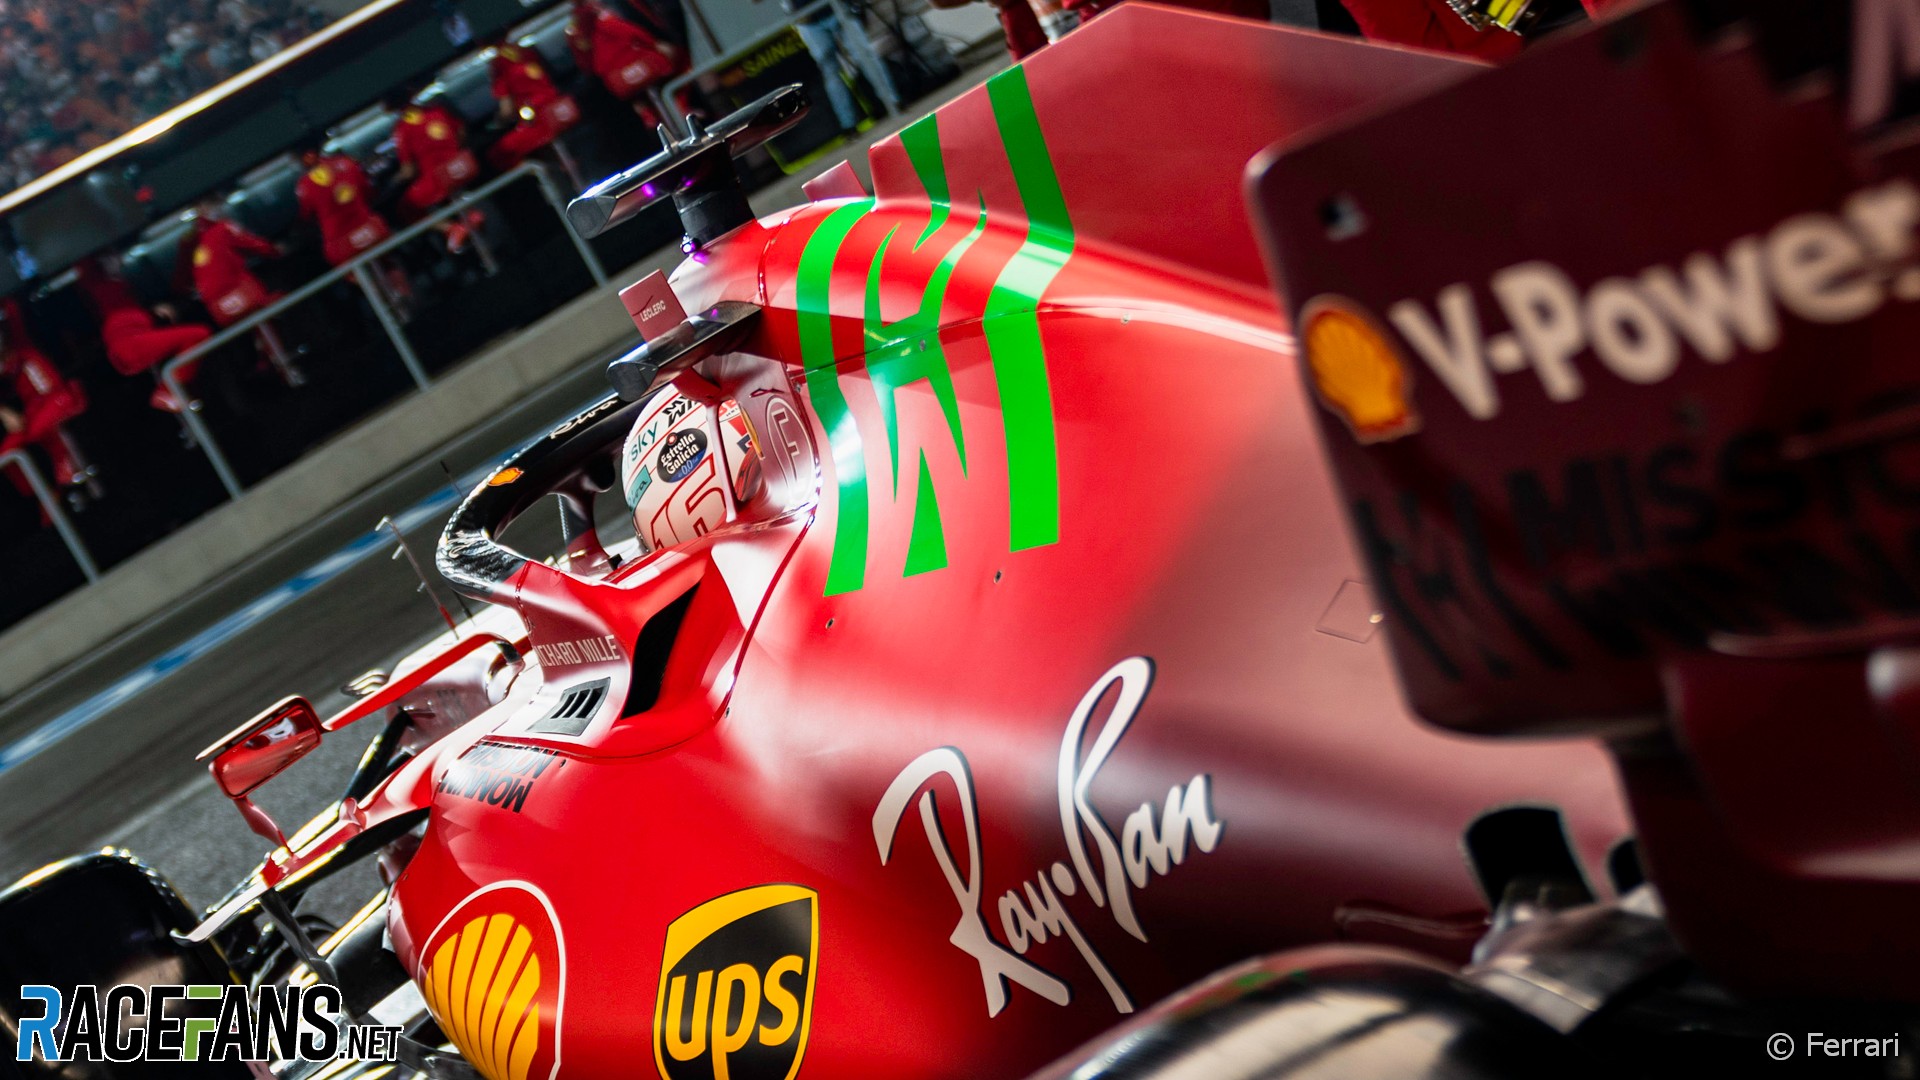 Ferrari has little to fear from the possible loss of its biggest F1 sponsor  · RaceFans